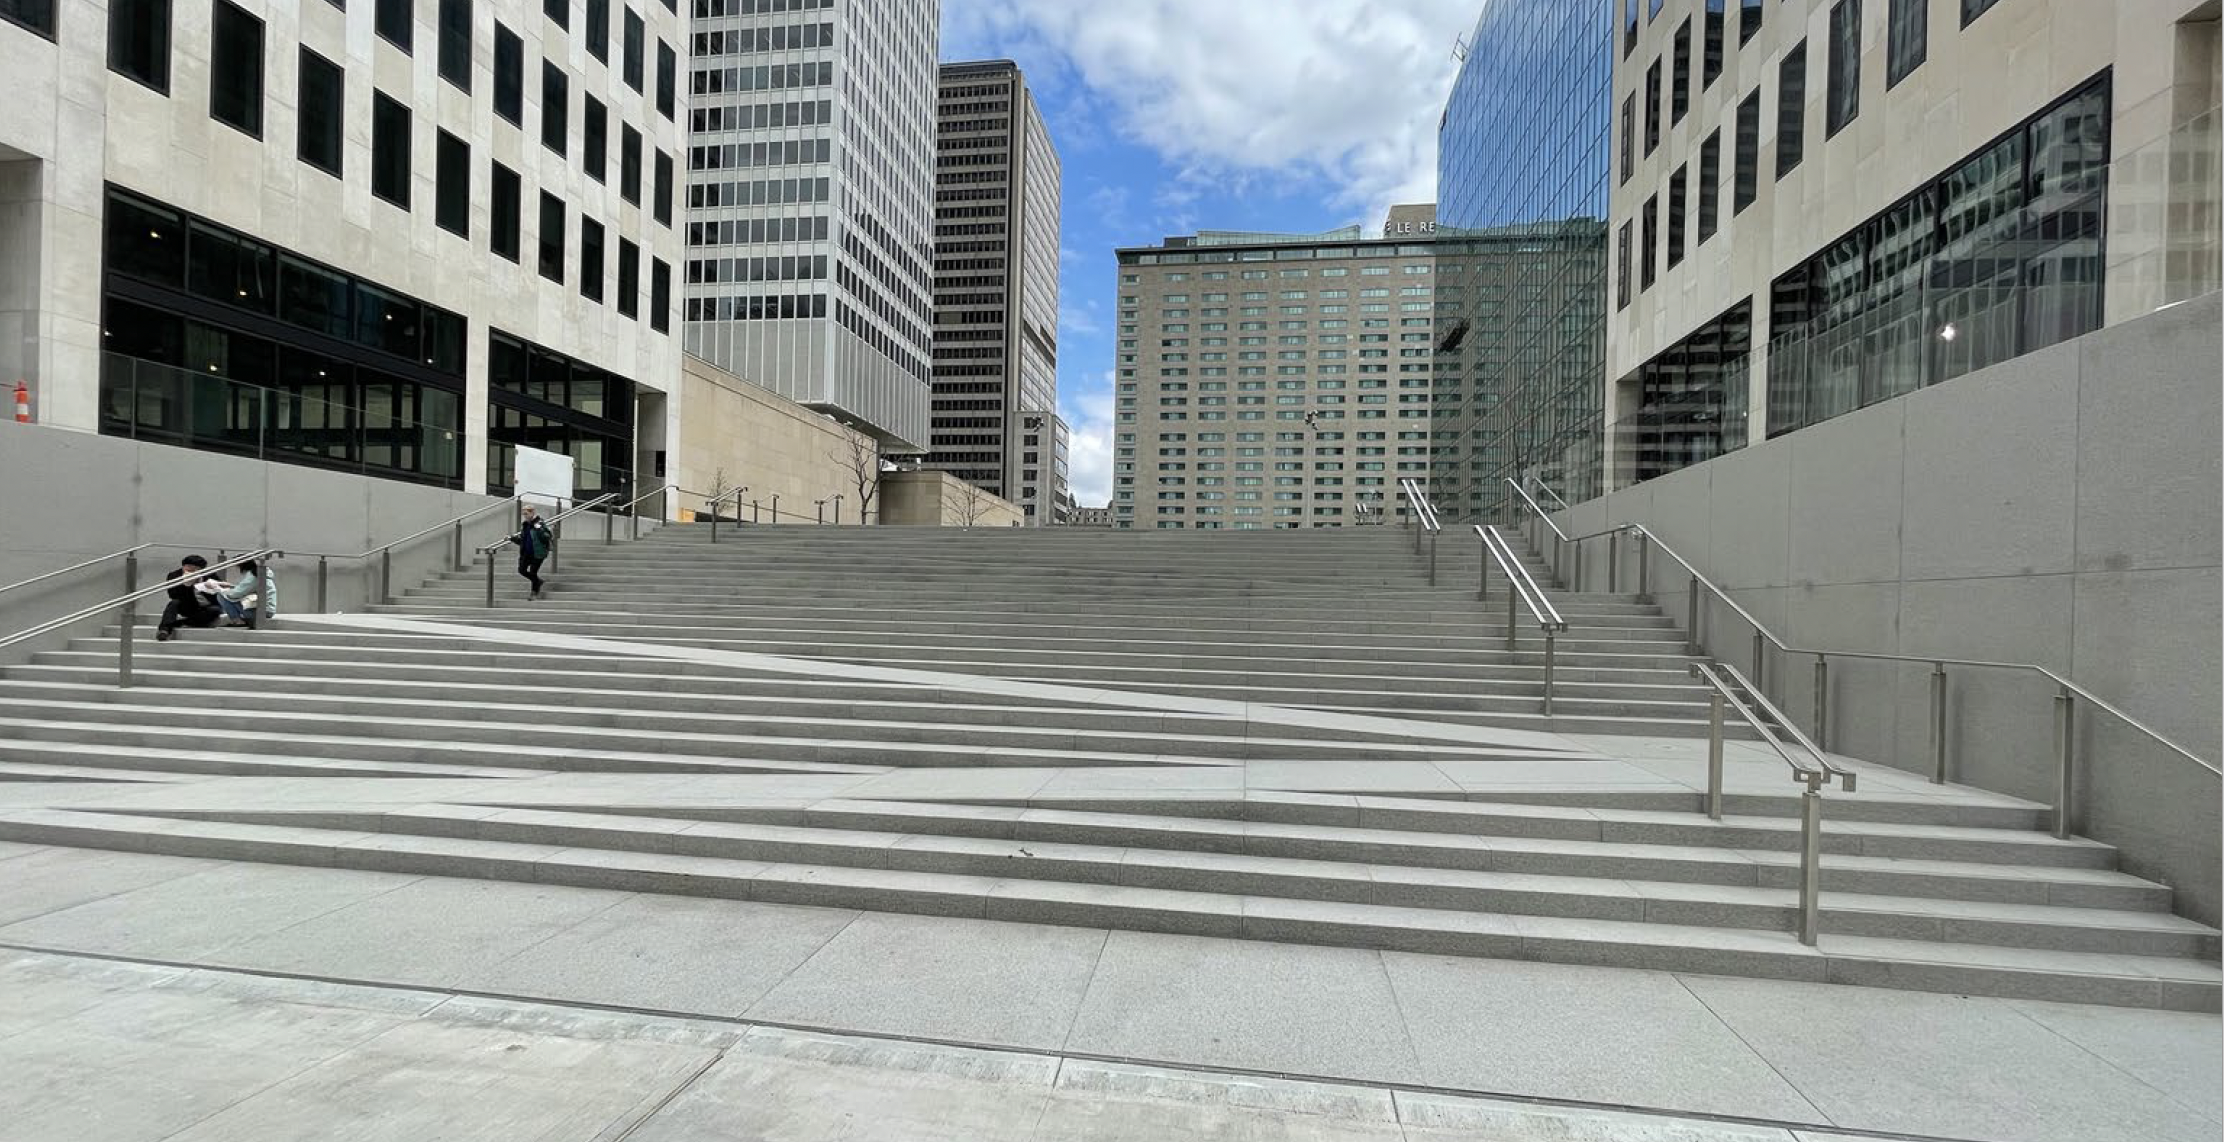 Artful outdoor stairs that fail to provide easy access for users with disabilities